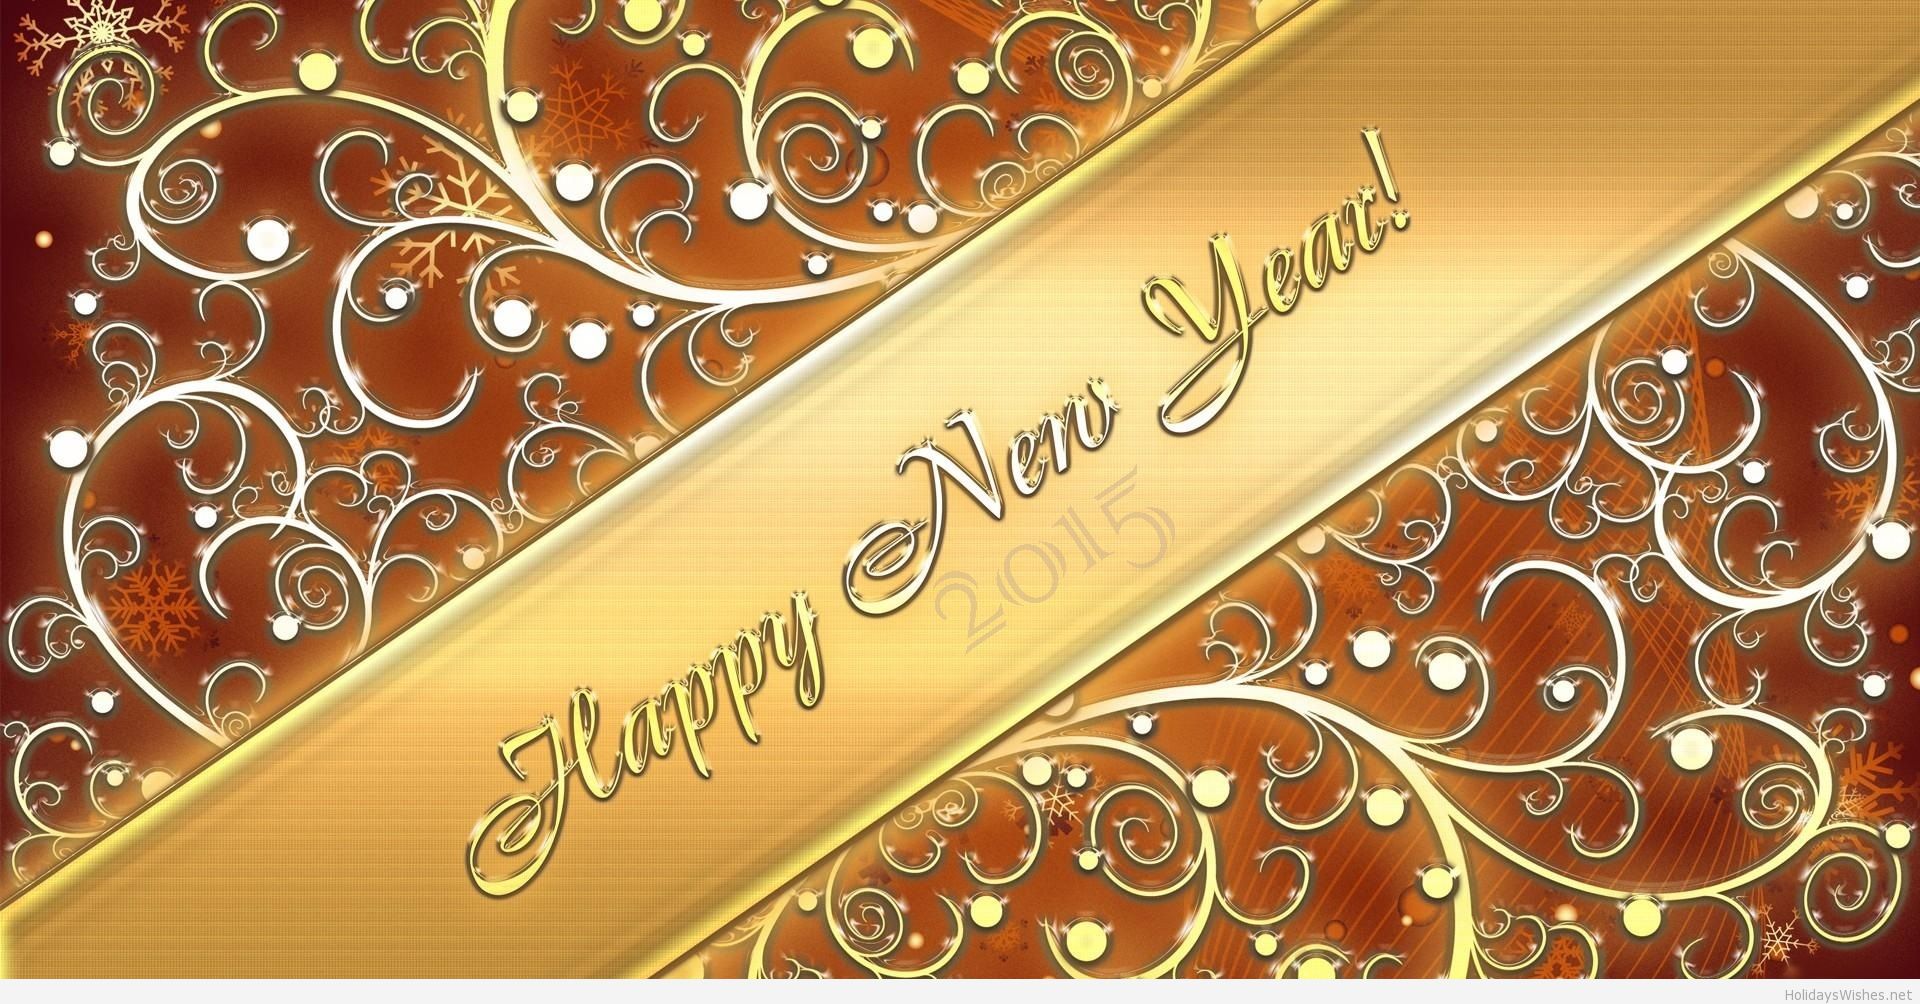 Name Amazing Happy New Year Celebration Wallpaper Widescreen